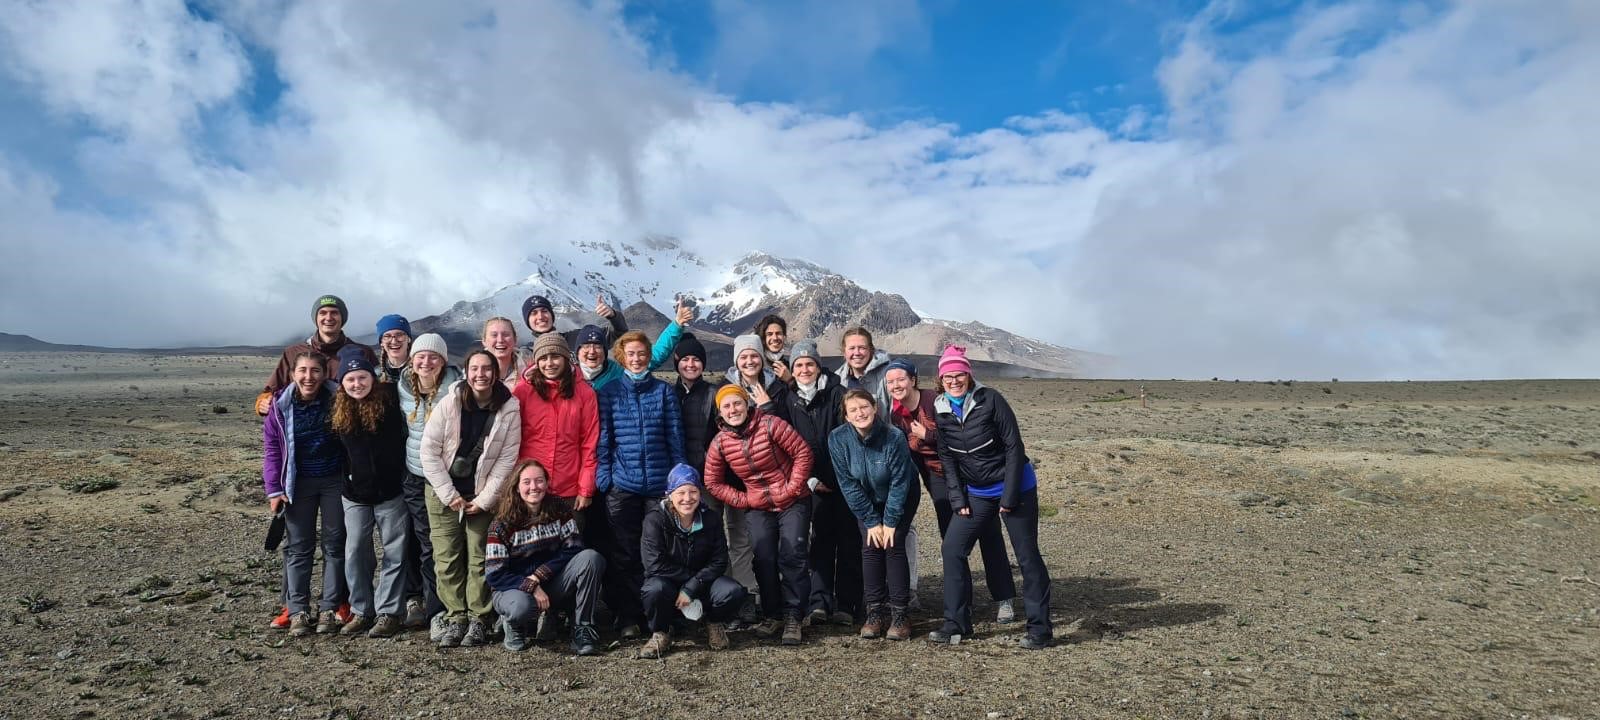 The Western group posing together in front of Chimborazo